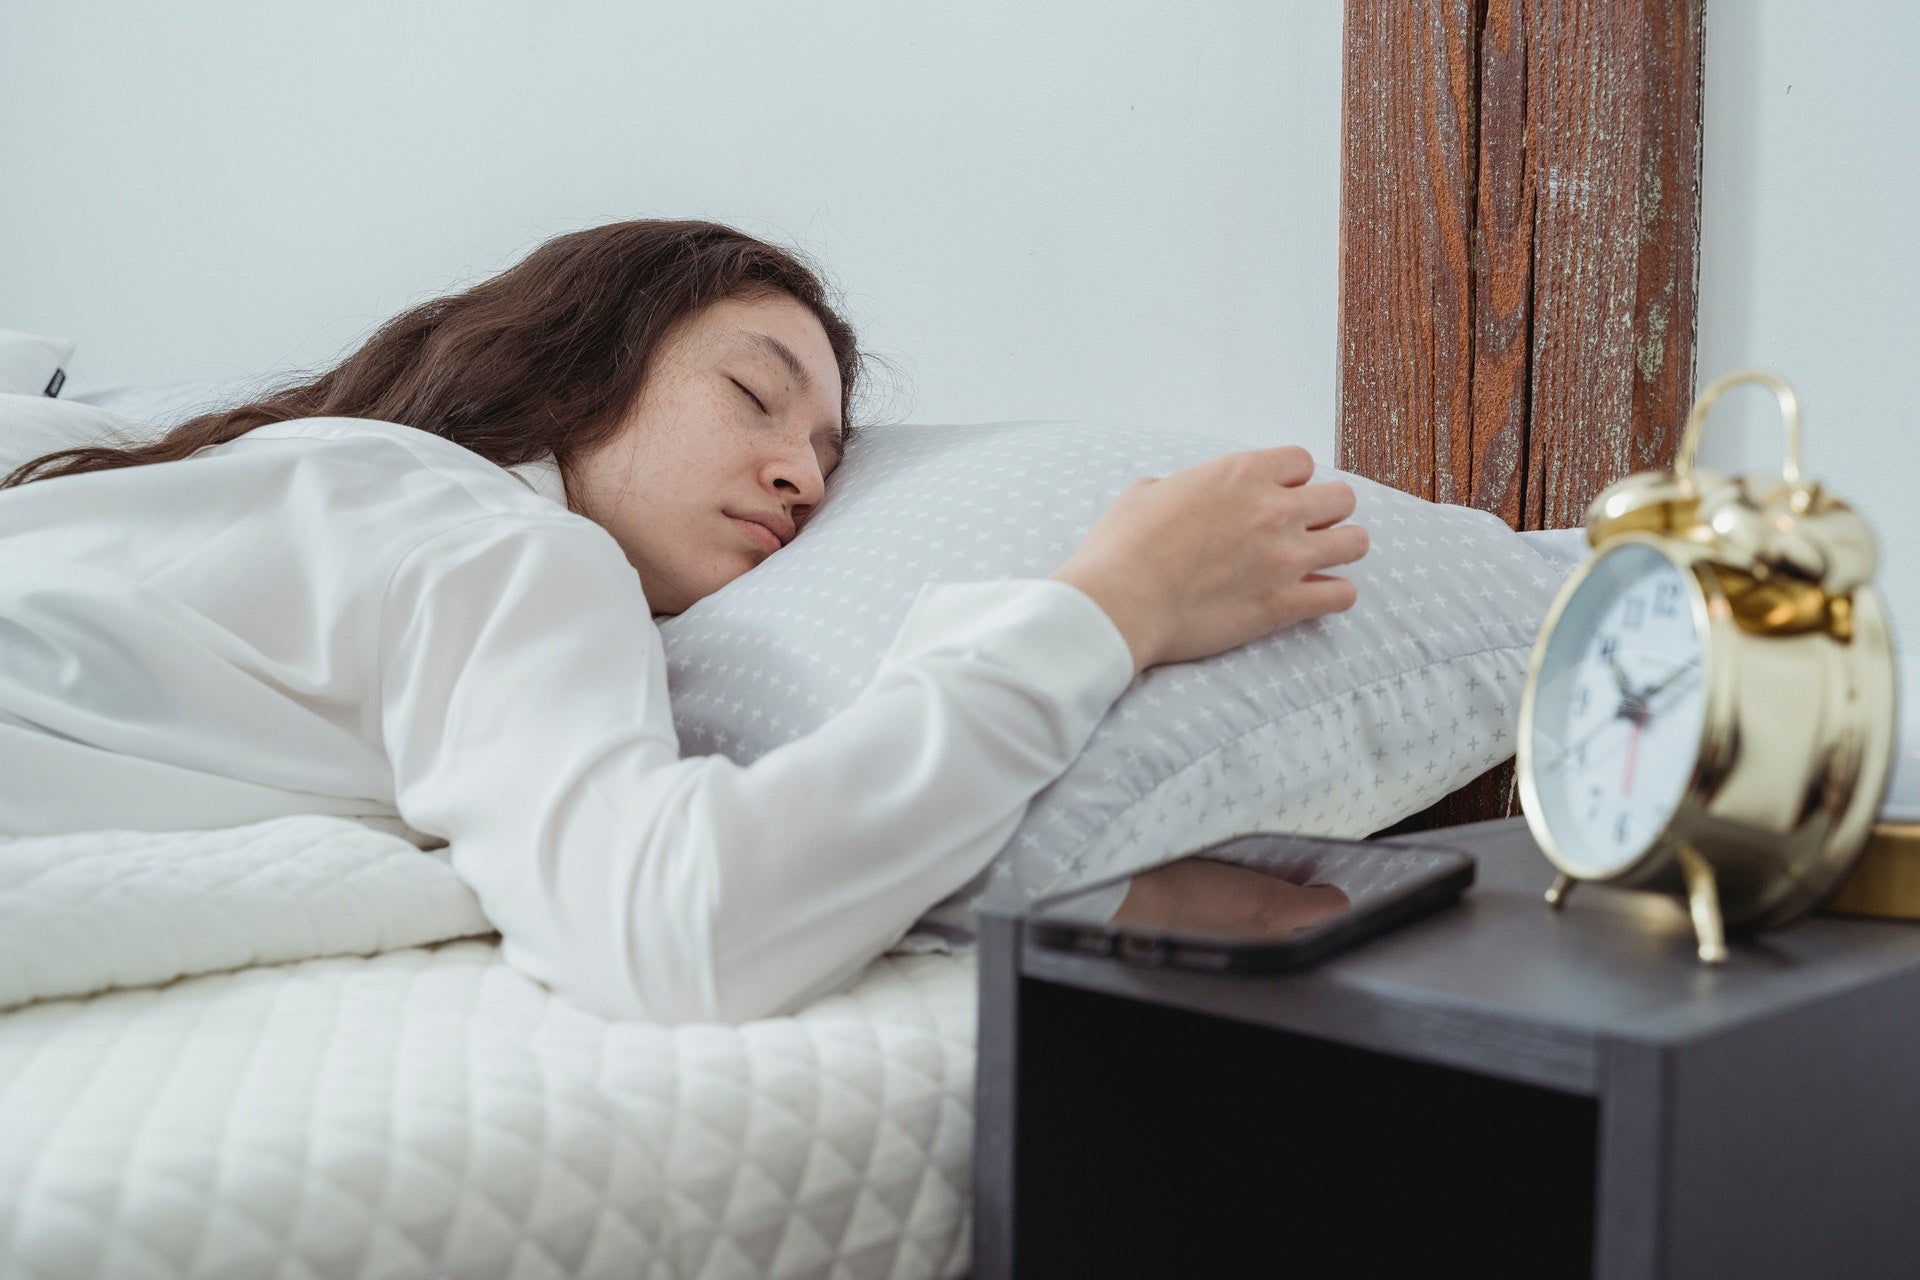 A girl asleep in bed, with her phone next to her on her bedside table